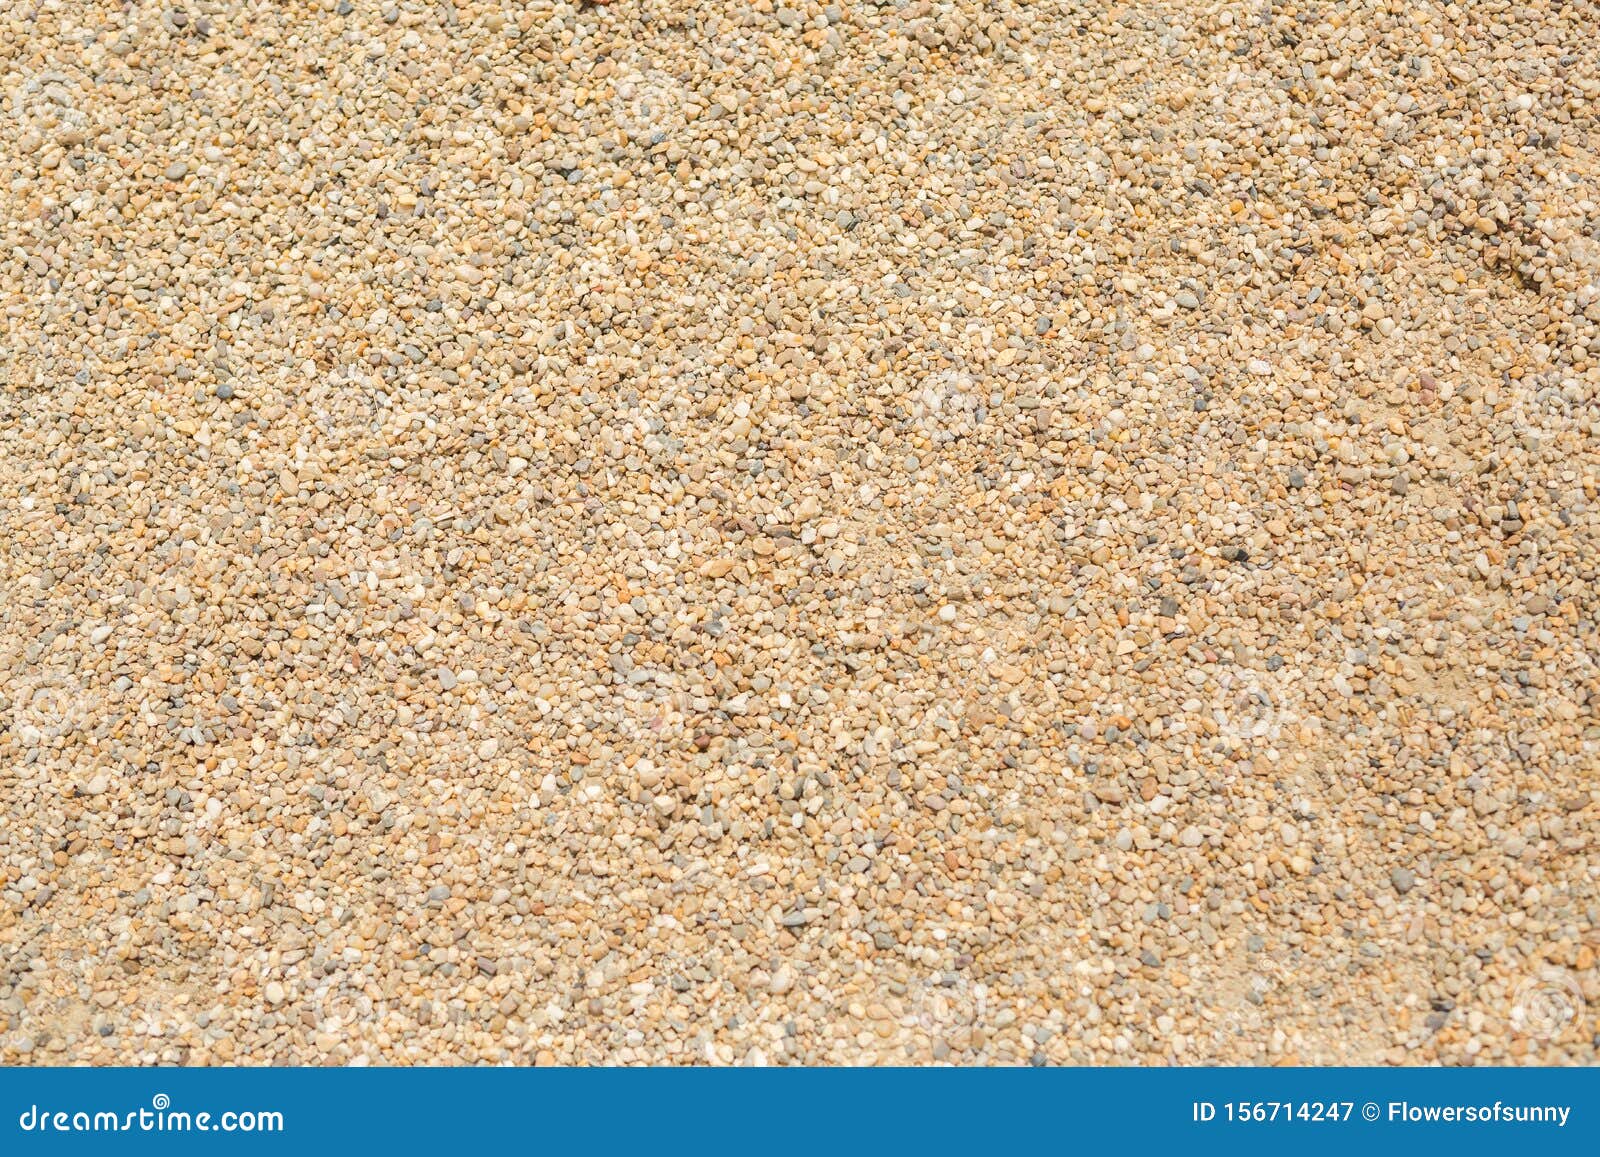 tiny gravel texture on brown concrete wall in sunny day